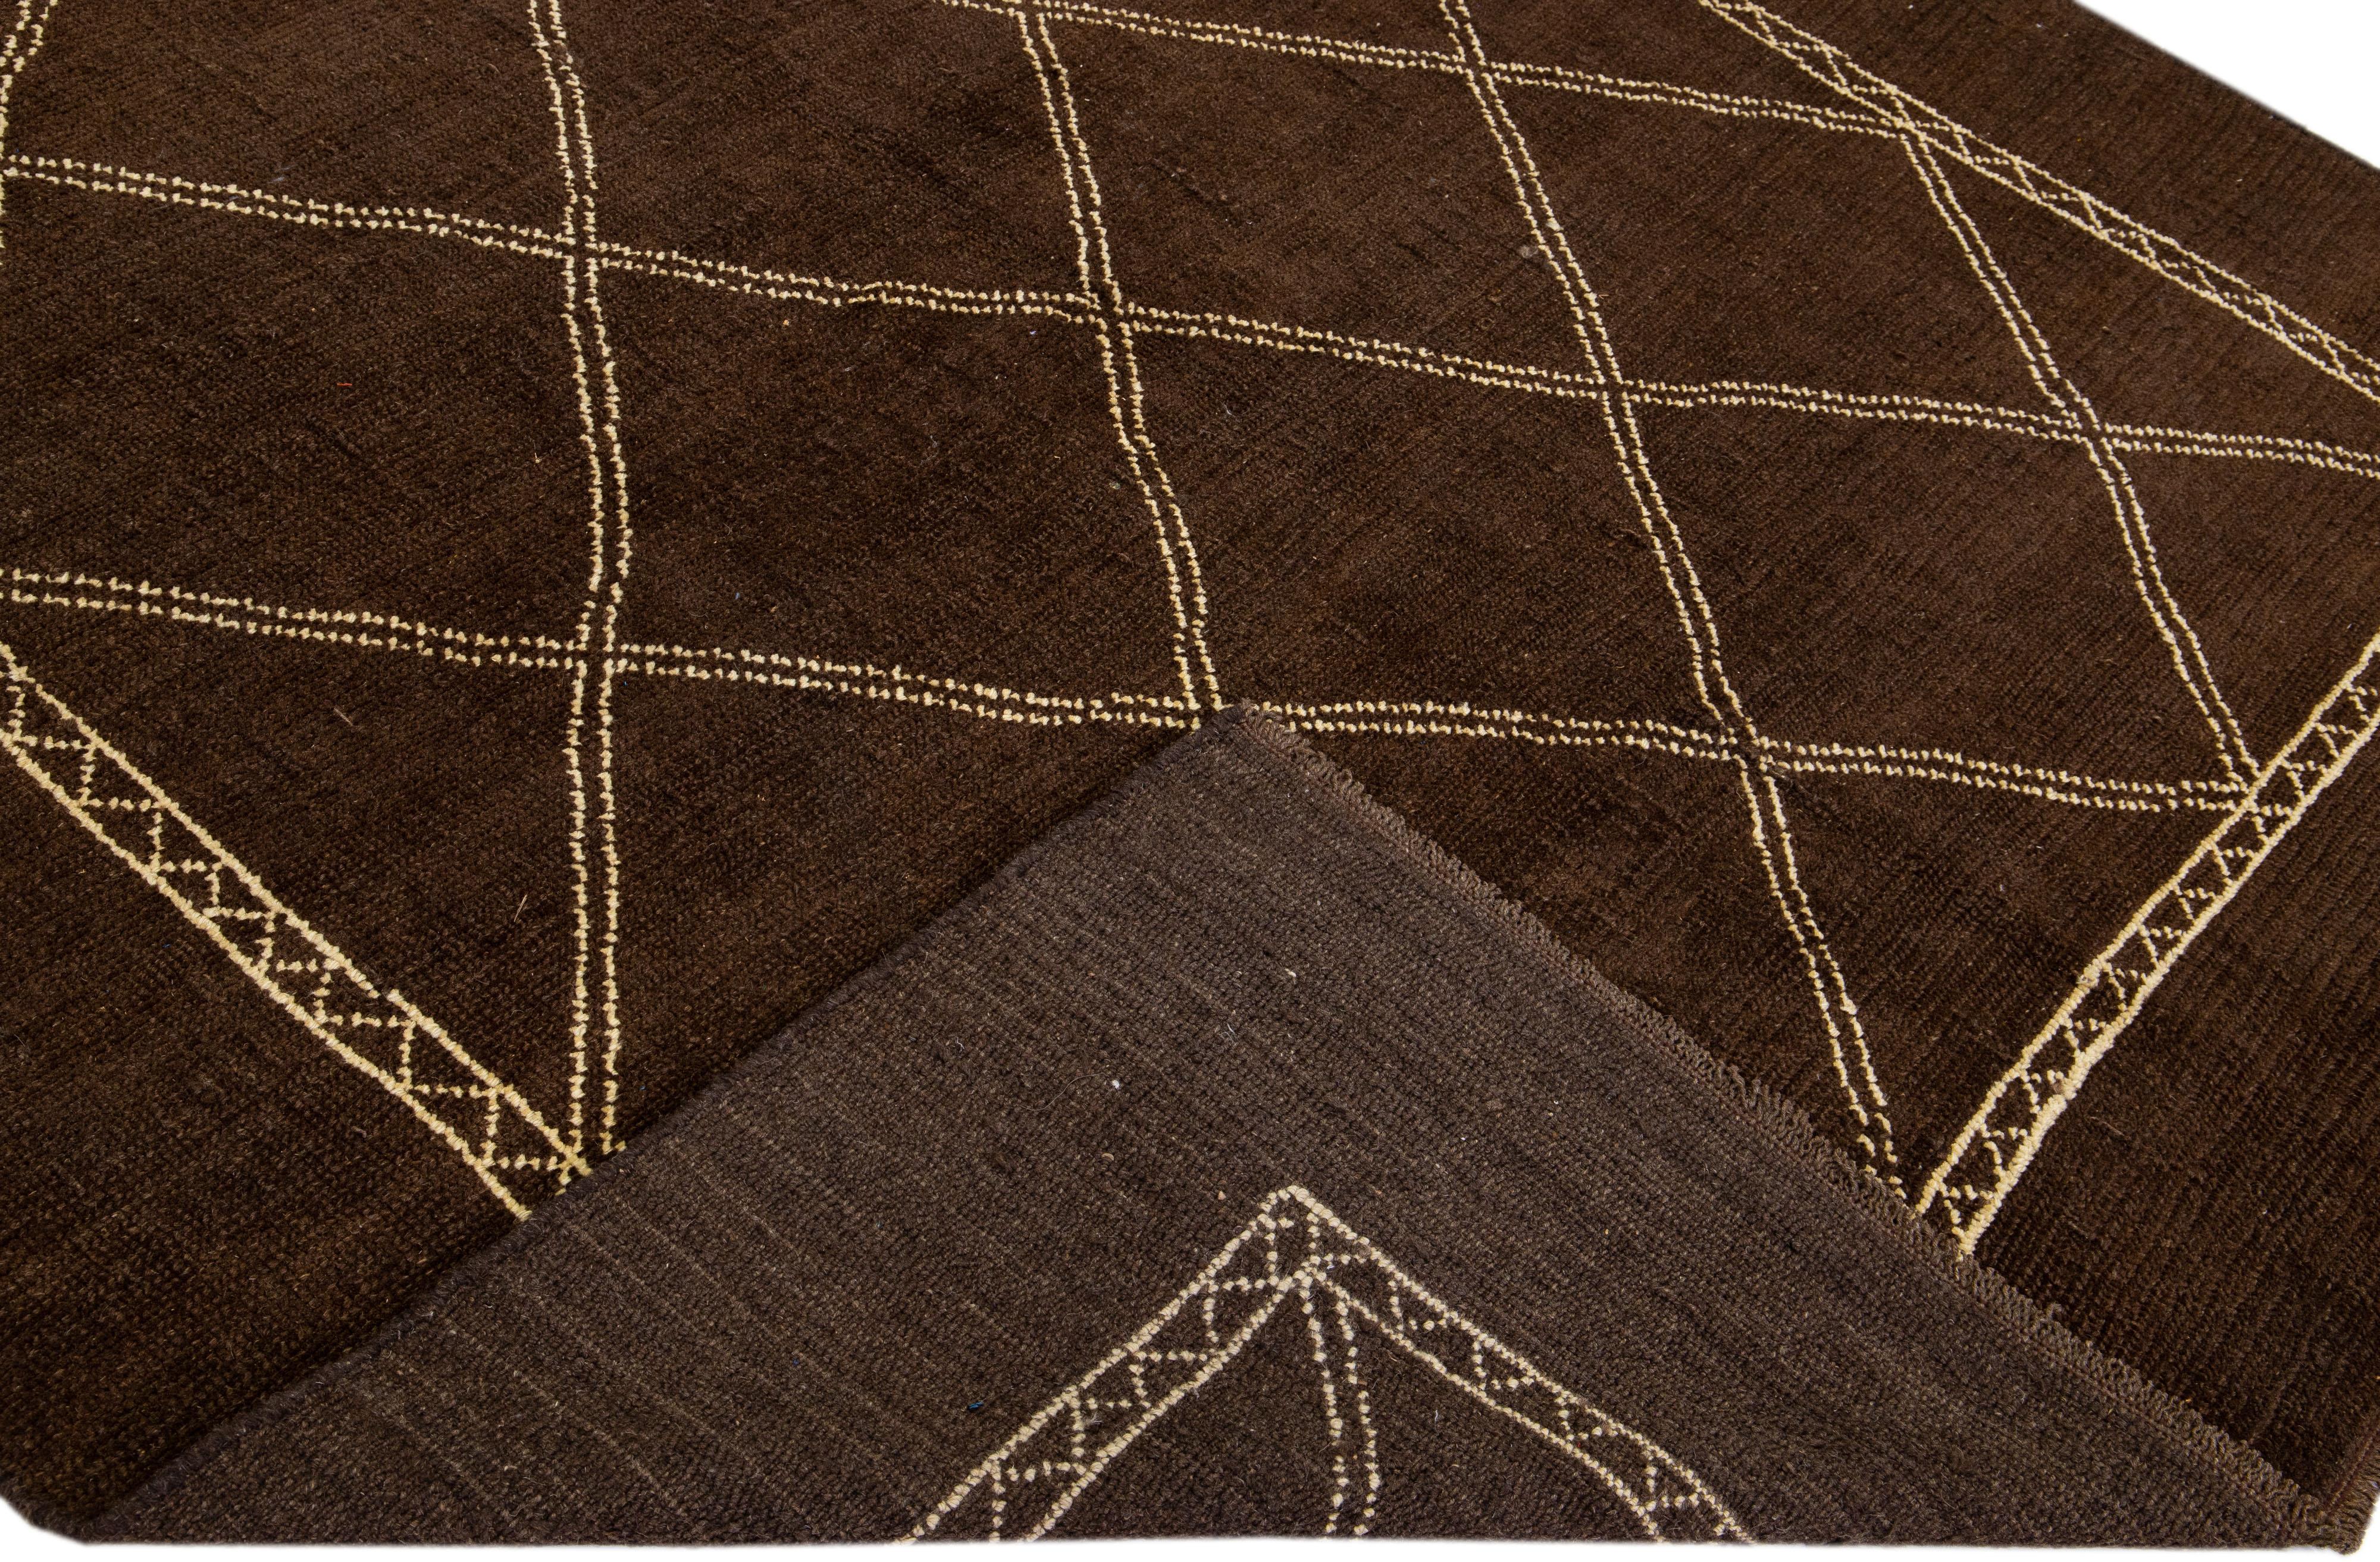 This Beautiful Moroccan-style handmade wool rug makes part of our Northwest collection and features a brown color field and beige accents in a gorgeous geometric tribal design.

This rug measures: 7'2